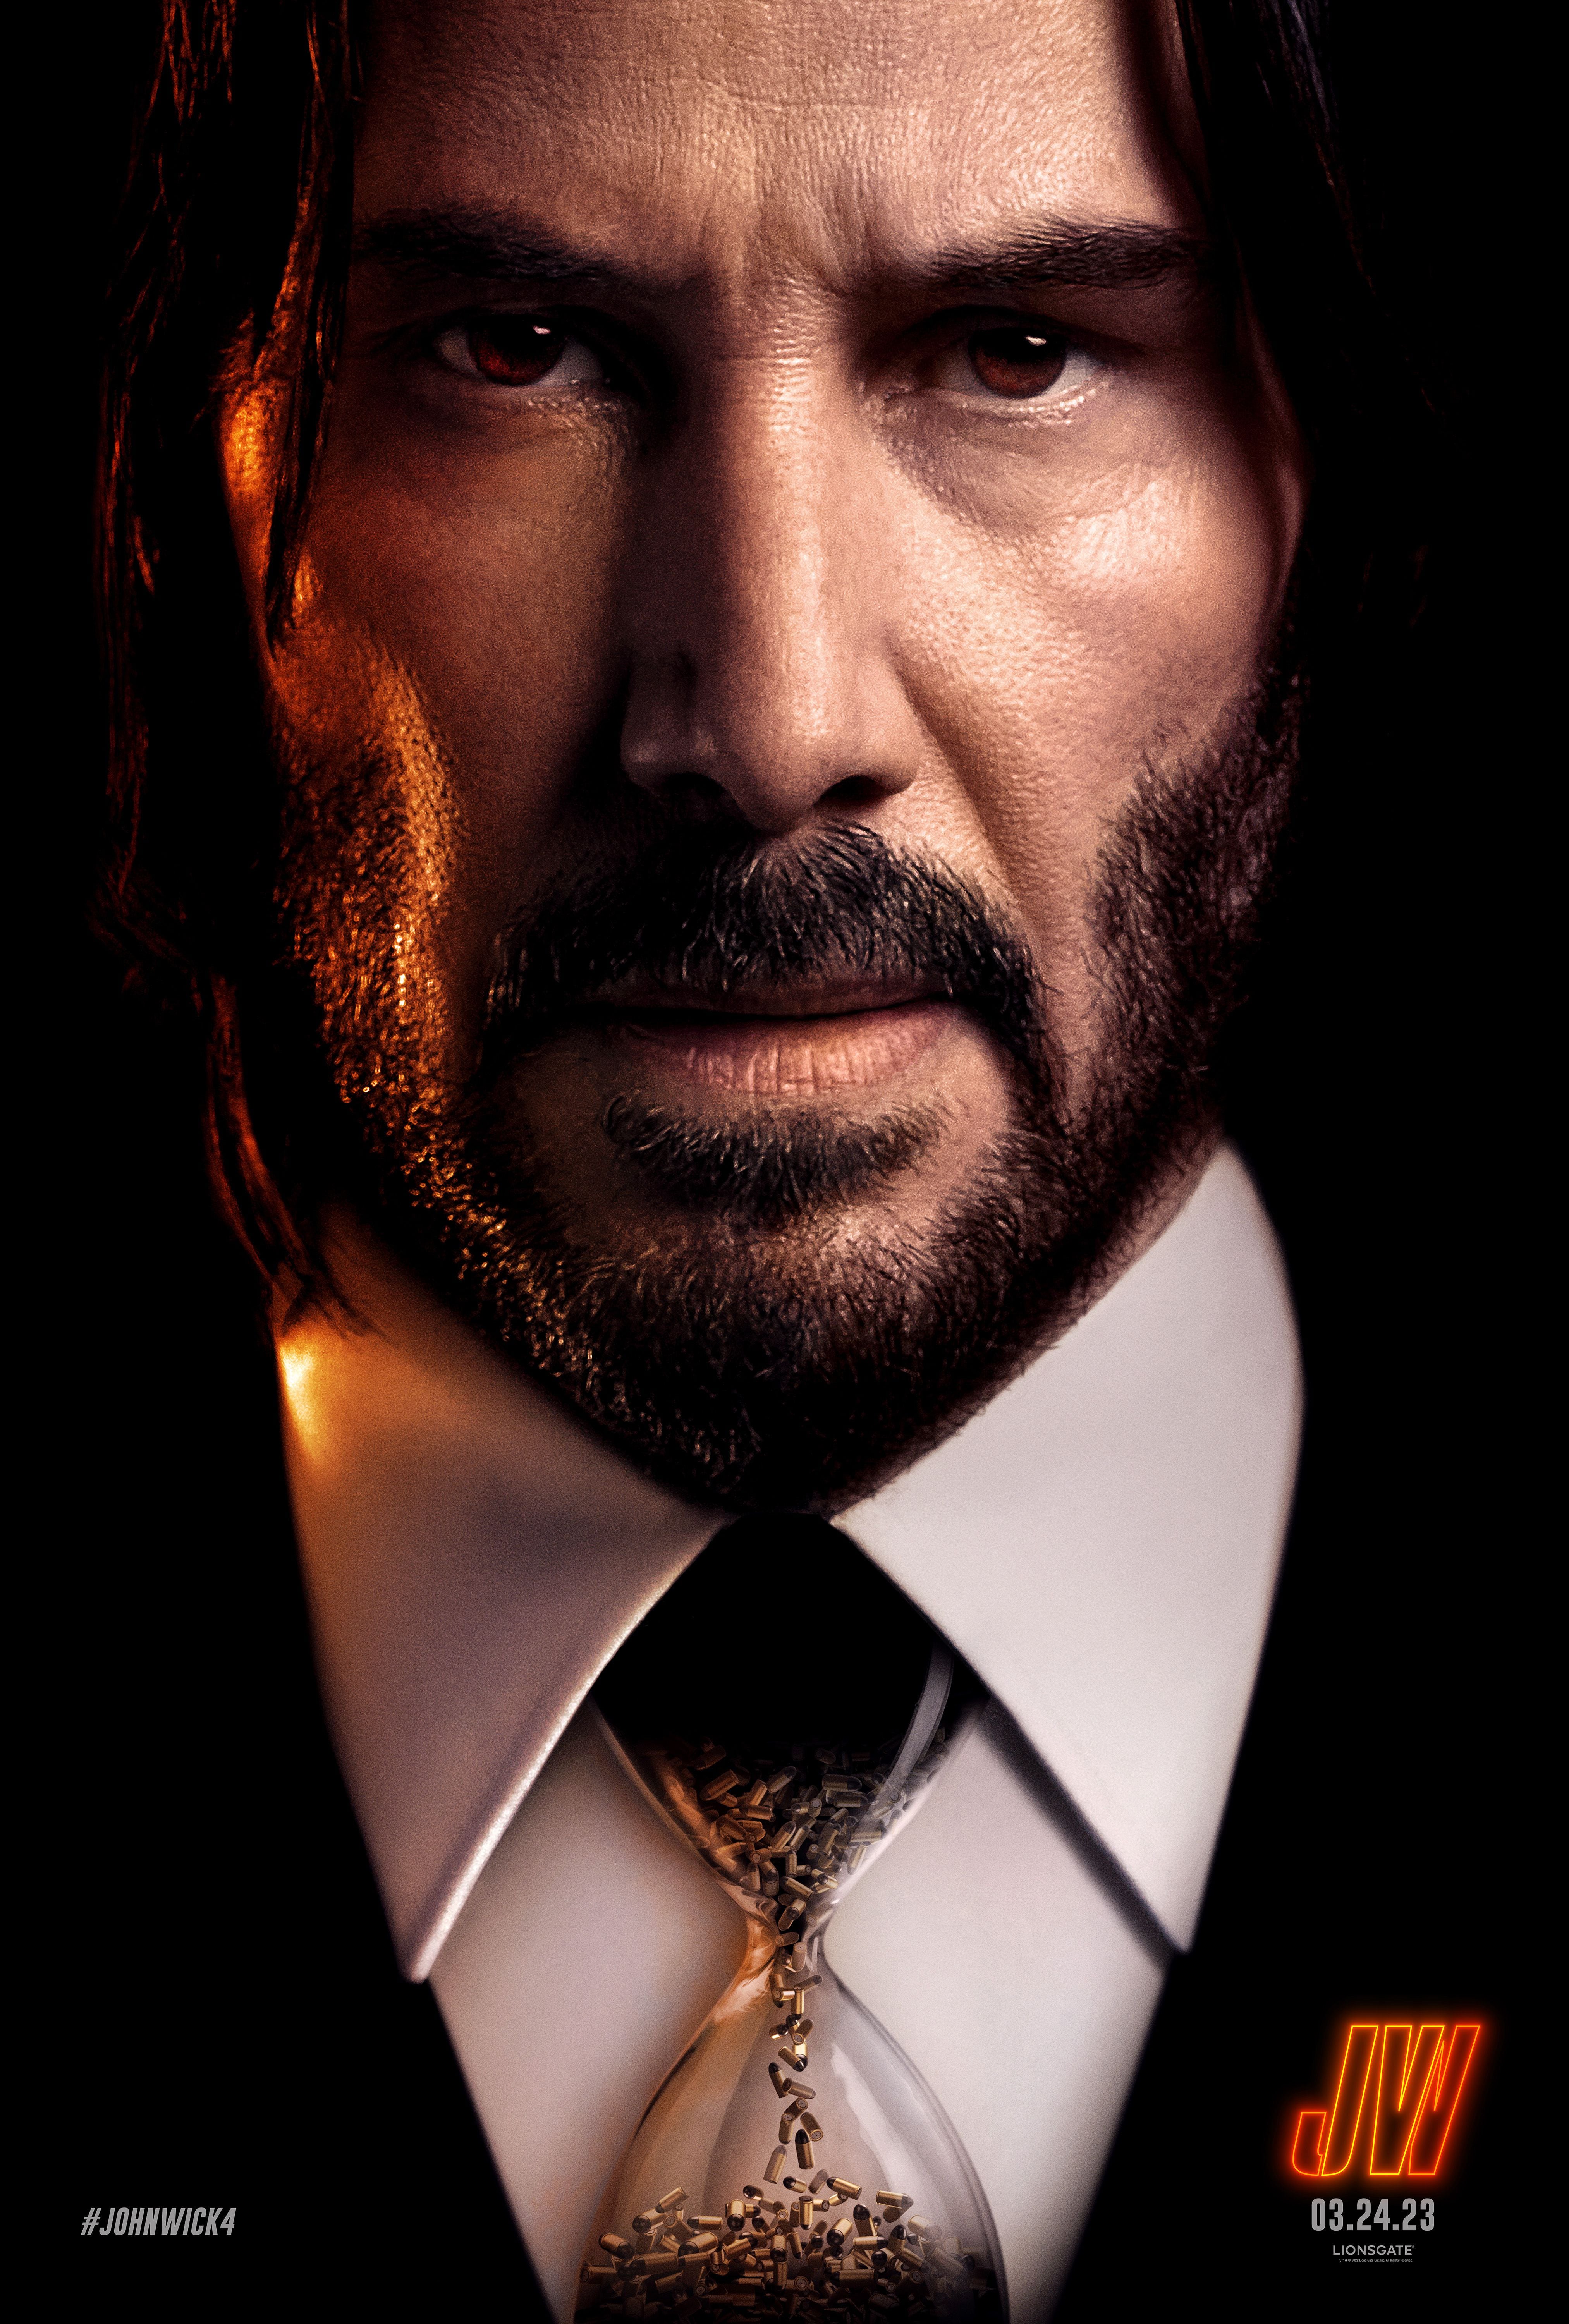 What's on Netflix on X: Three JOHN WICK movies are headed to Netflix US on  January 1st. John Wick, John Wick: Chapter 2, and John Wick: Chapter 3 -  Parabellum are set